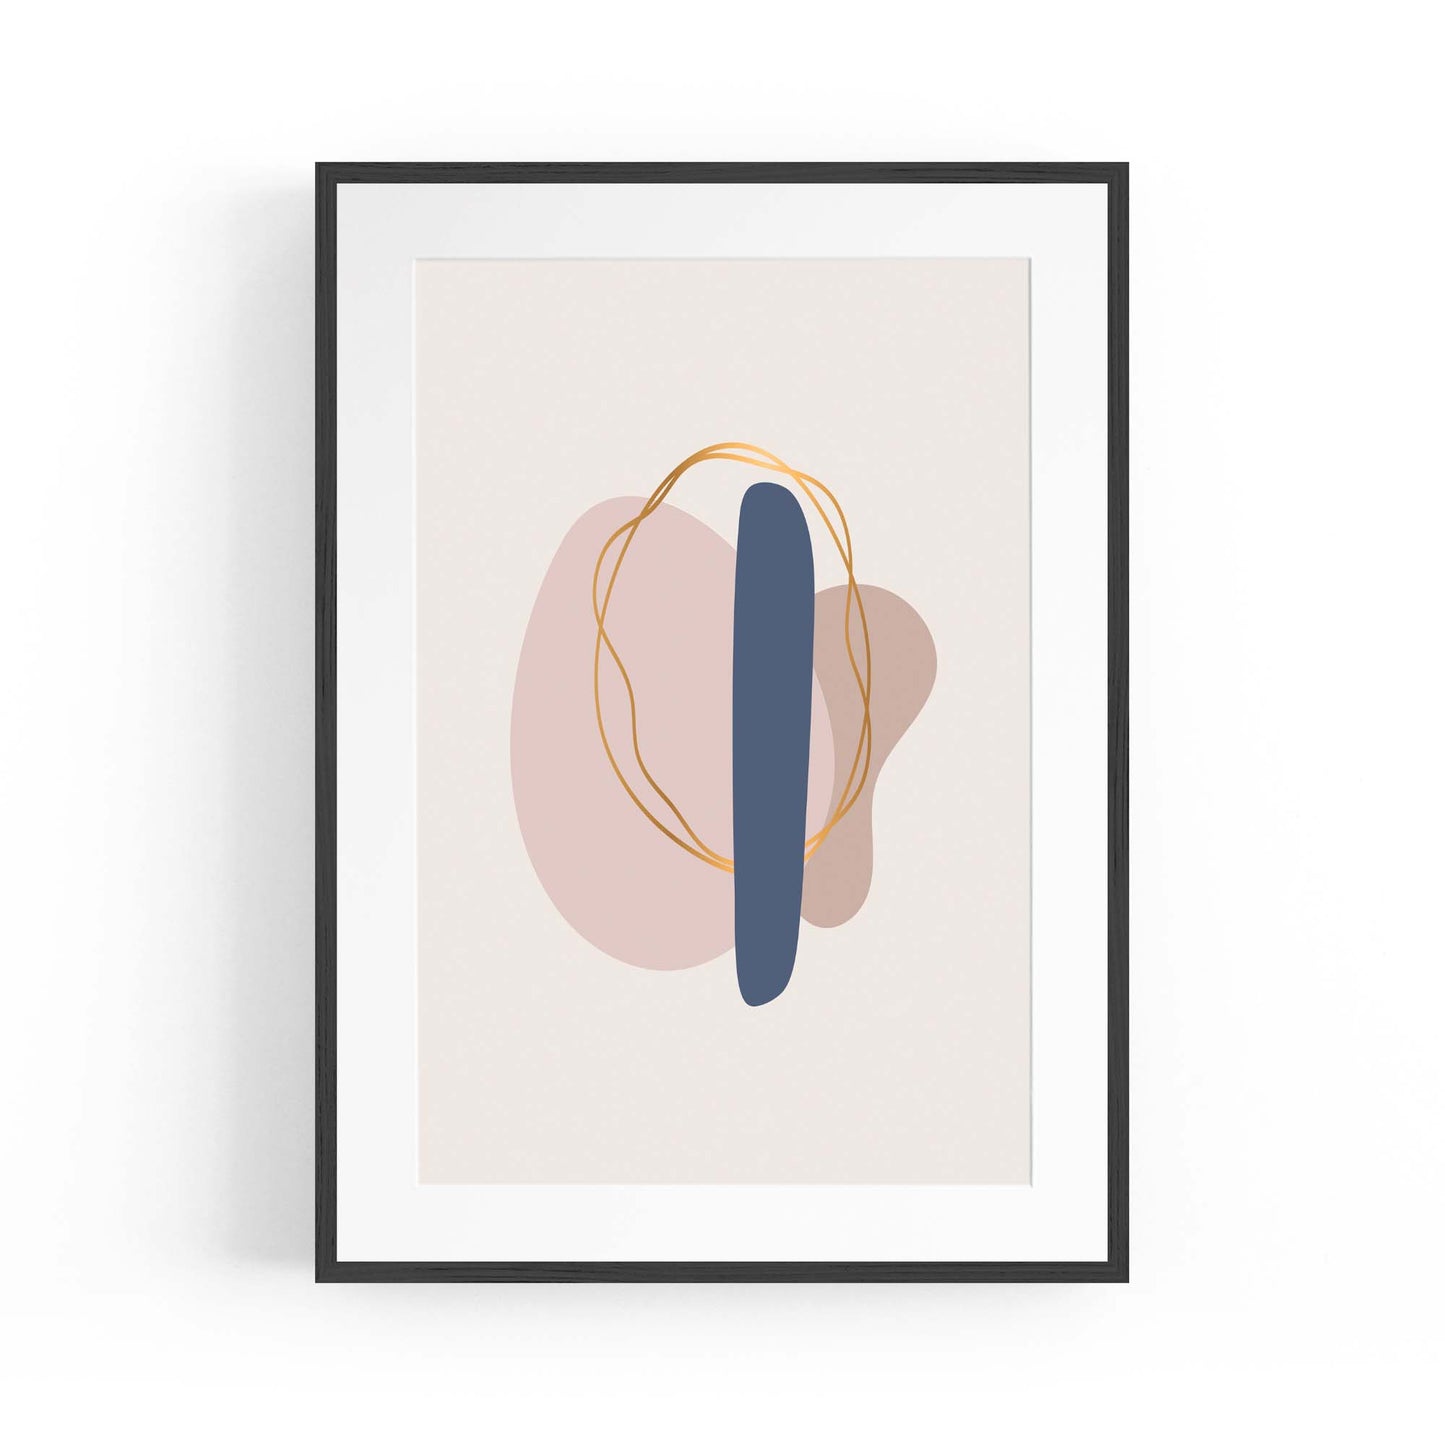 Pale Abstract Shapes Wall Art #10 - The Affordable Art Company